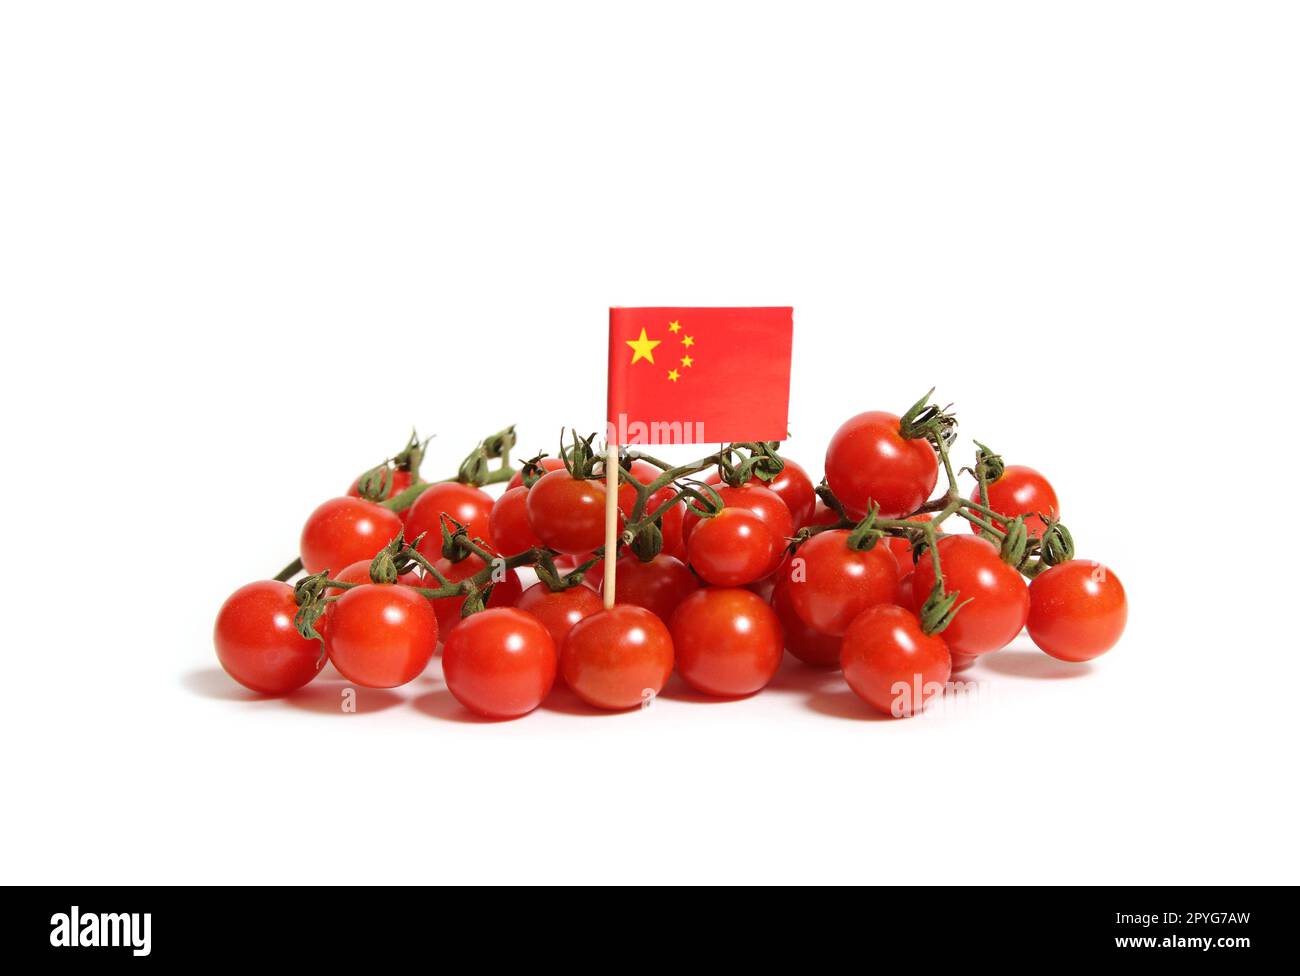 Pile of Fresh Cherry Tomatoes With Flag of China Isolated on White Background Stock Photo